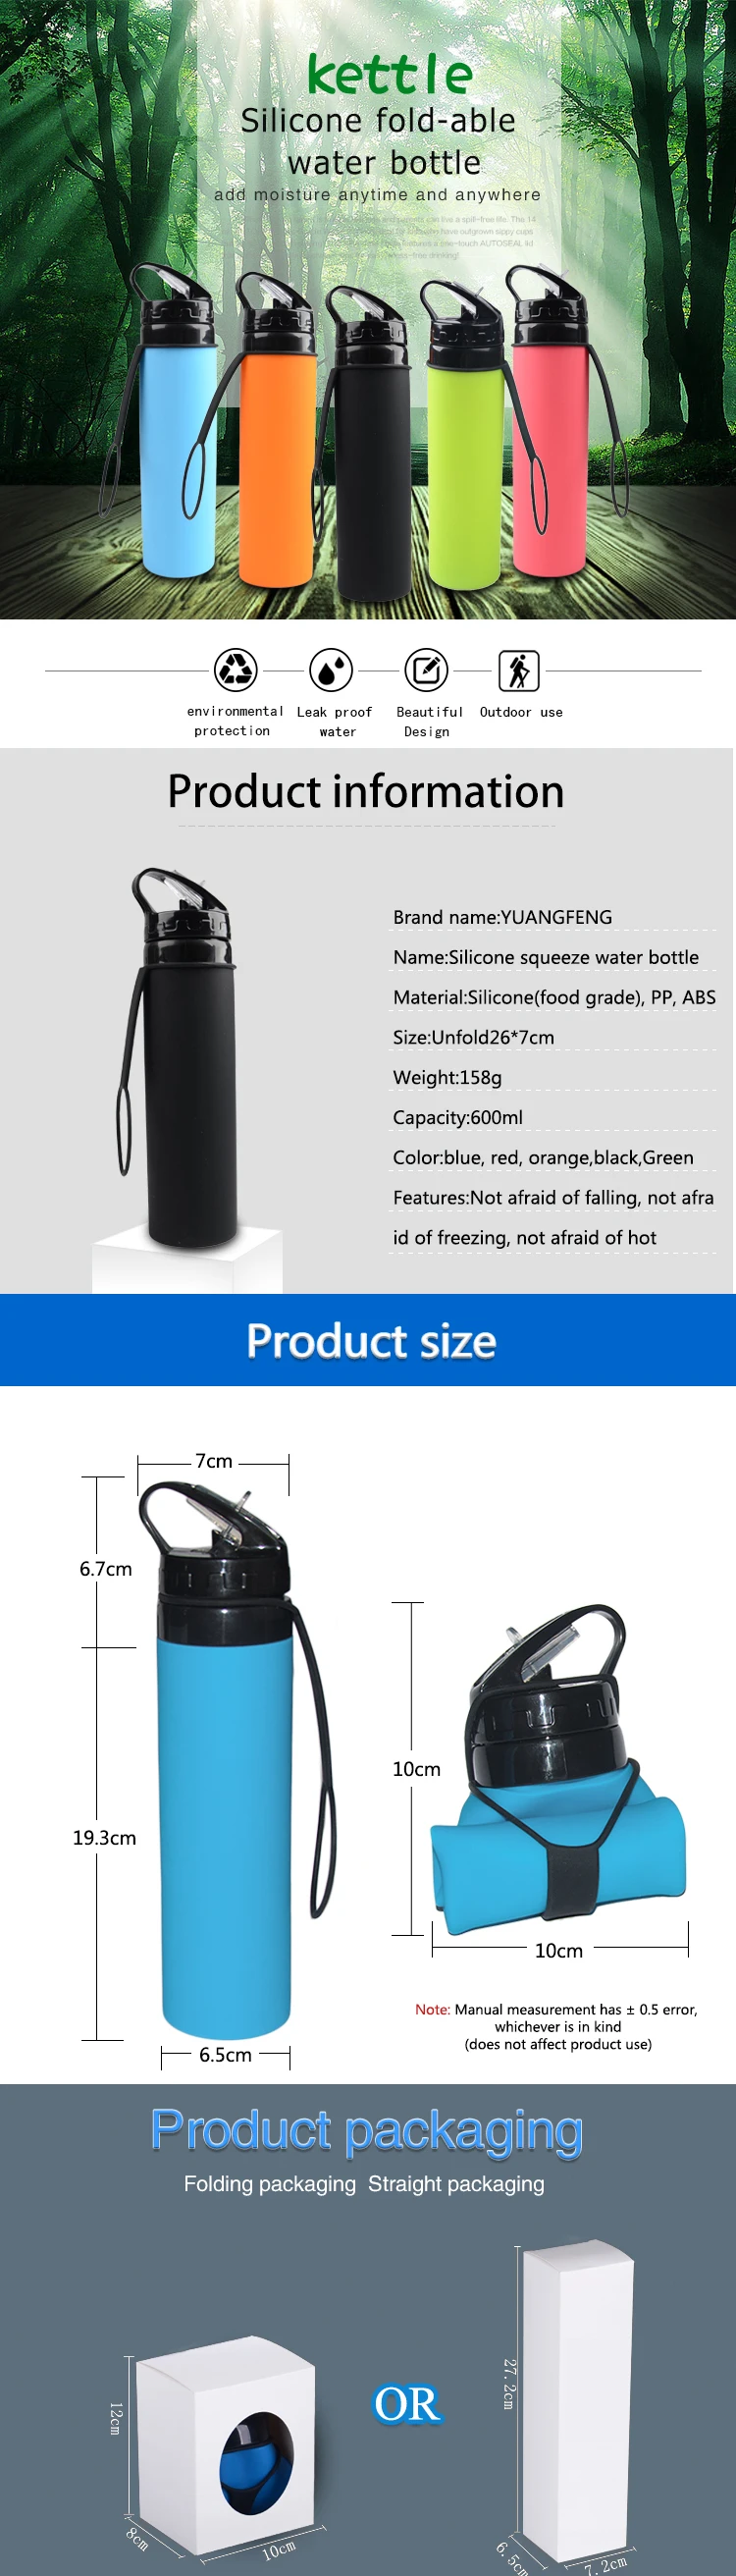 water bottle silicone SH-03 Details 3